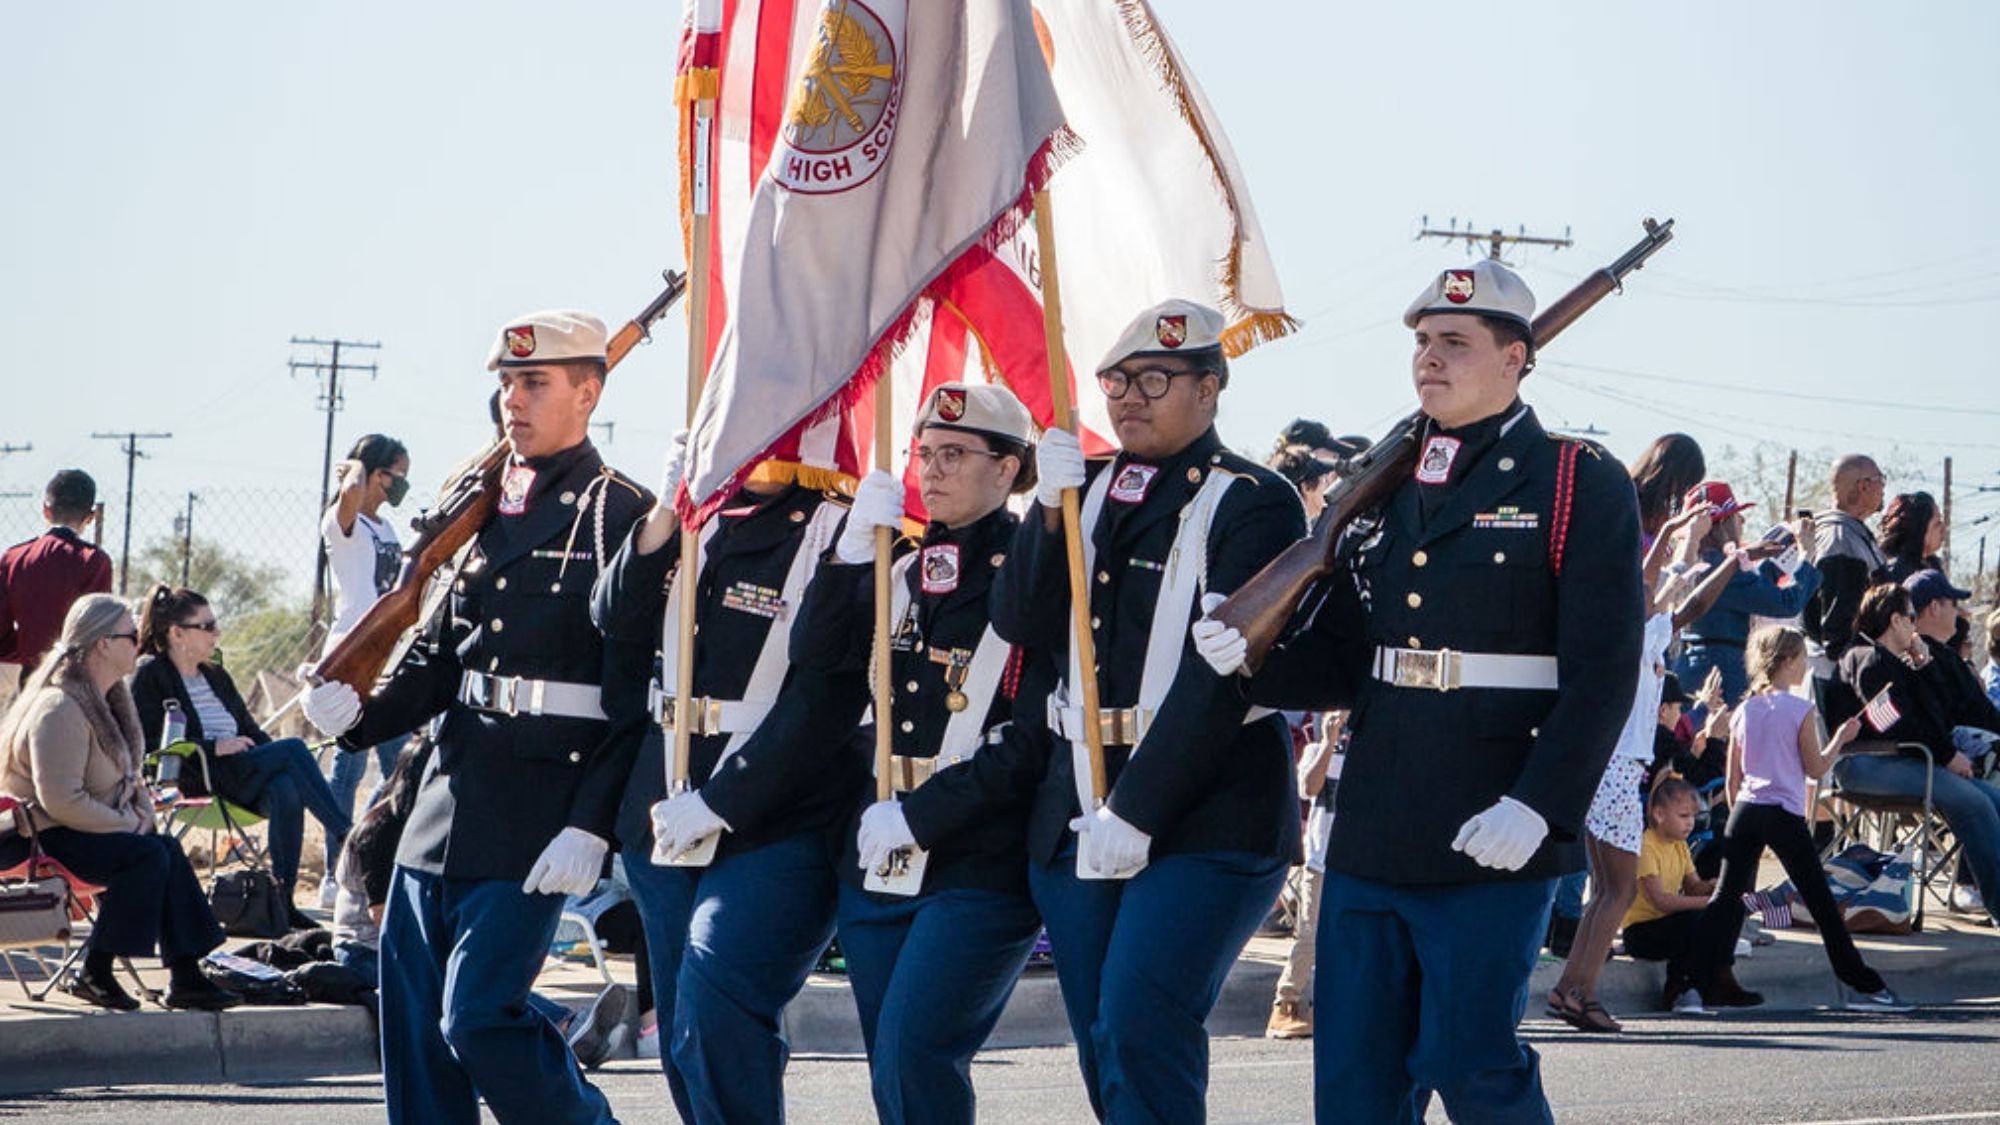 Victorville Veterans Day Parade